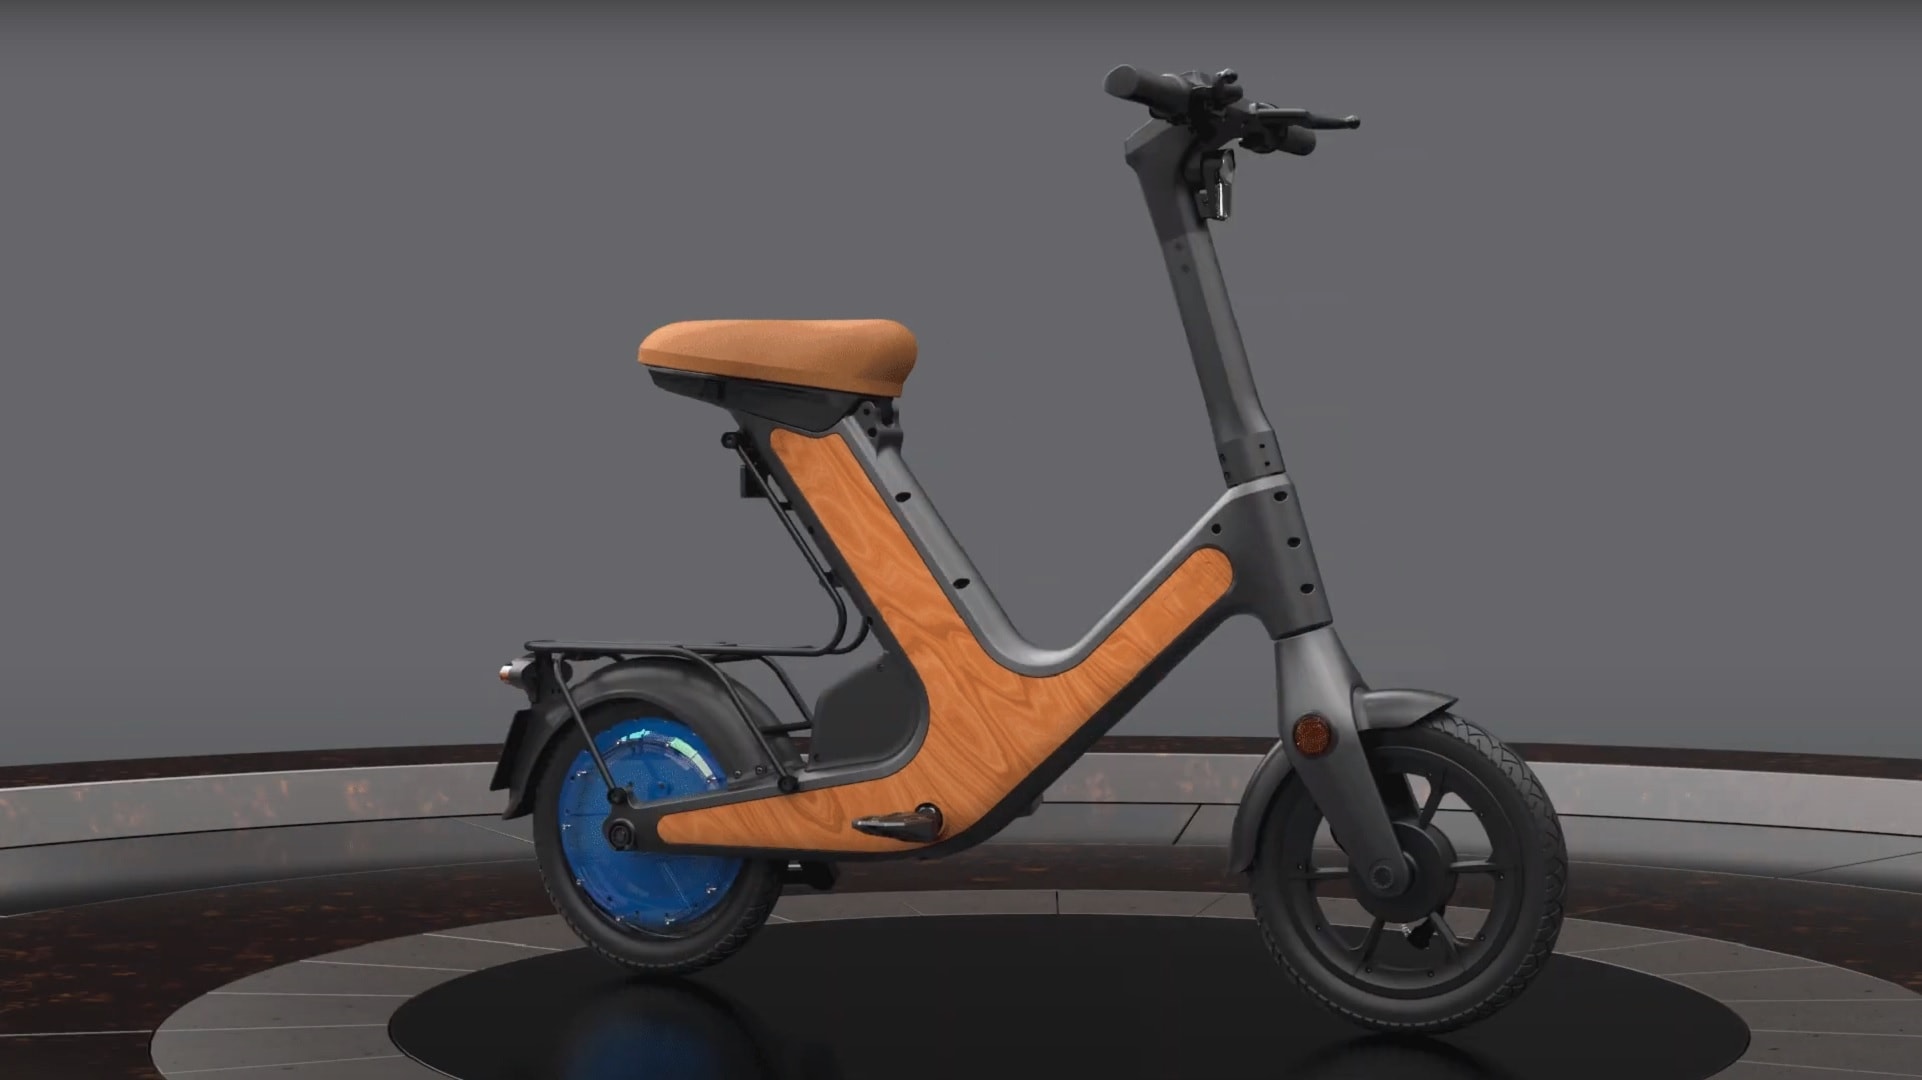 Minimalist-Looking E-Moped Has a Magnesium Frame, Claims to be the World's Lightest autoevolution